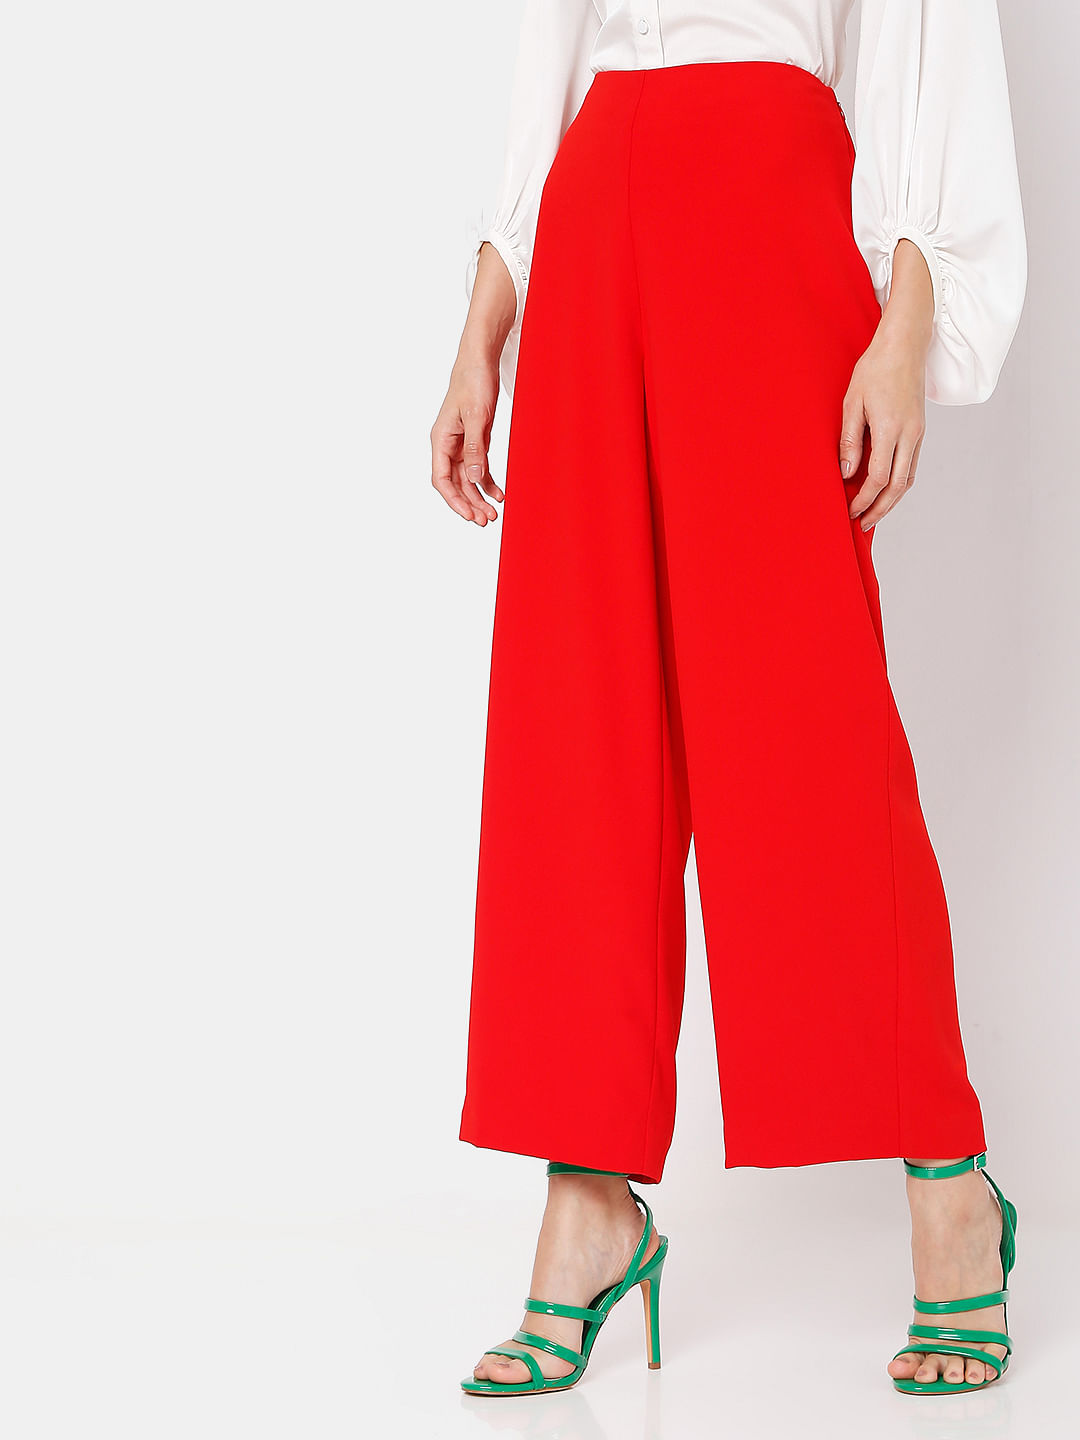 Missguided  High Waist Wide Leg Trousers Red  Red wide leg pants Red  trousers outfit Red pants outfit